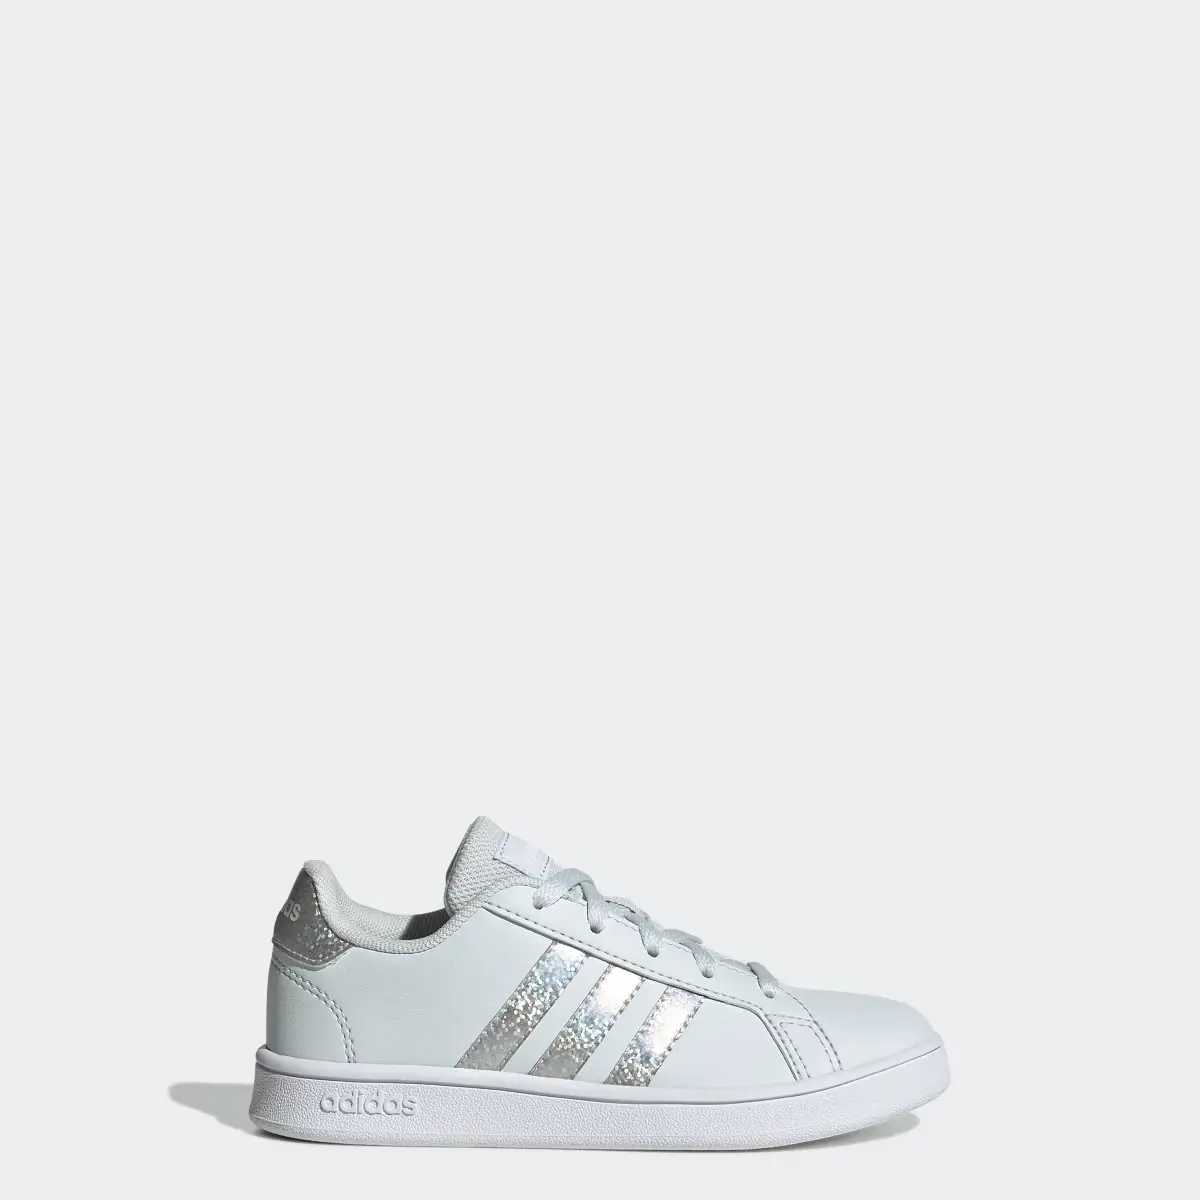 Adidas Grand Court Print Lace Shoes. 1